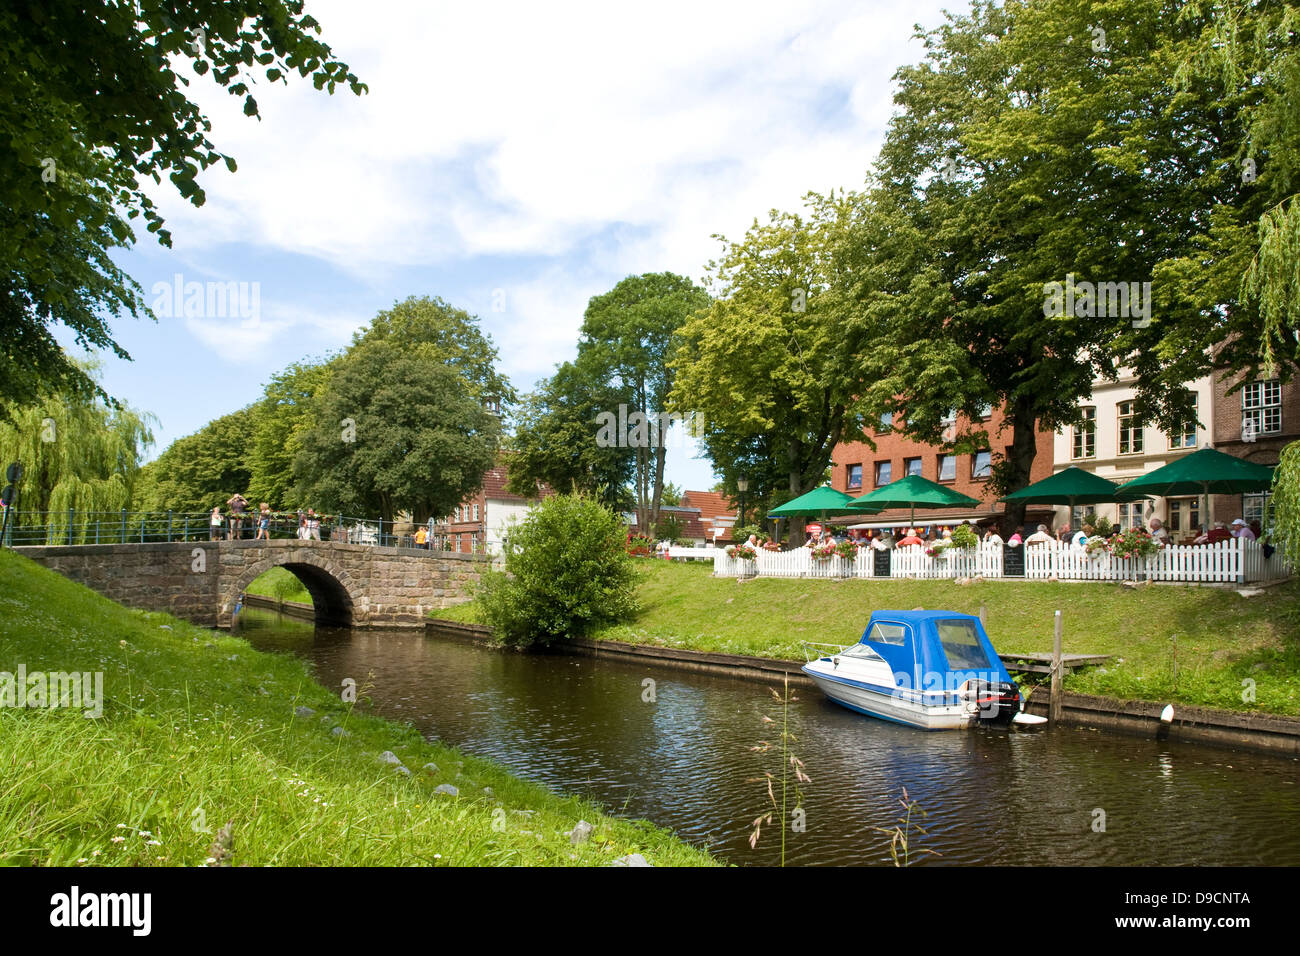 Idyllic situation in a canal in Friedrich's town, Idyllic location on a canal in Friedrichstadt Stock Photo